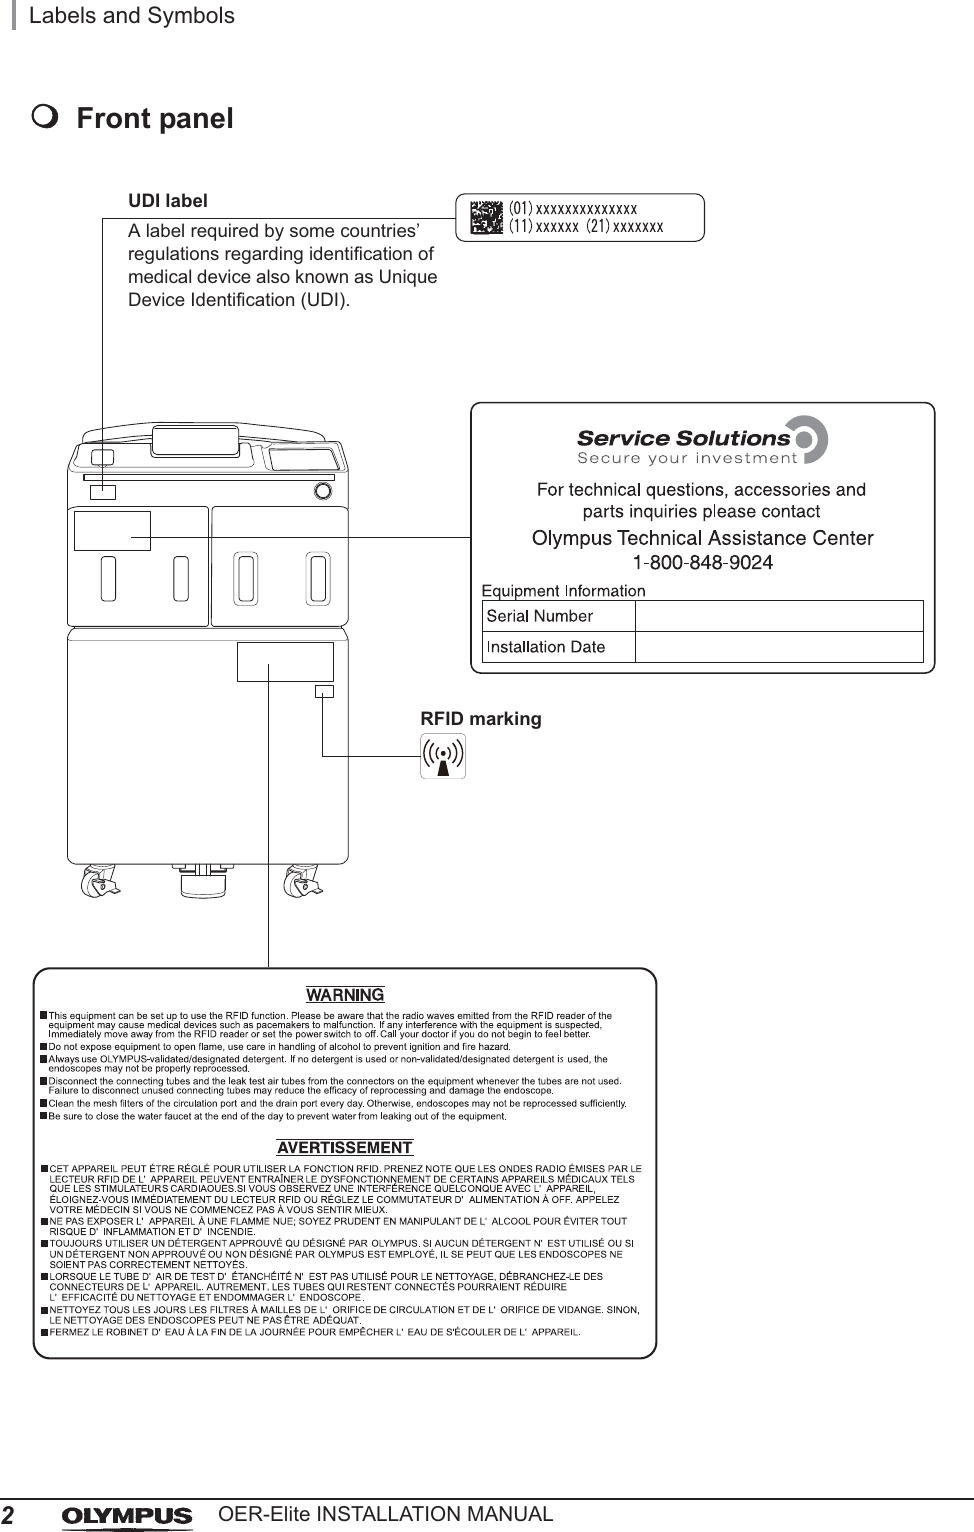 2Labels and SymbolsOER-Elite INSTALLATION MANUALFront panelRFID markingUDI labelA label required by some countries’ regulations regarding identification of medical device also known as Unique Device Identification (UDI).